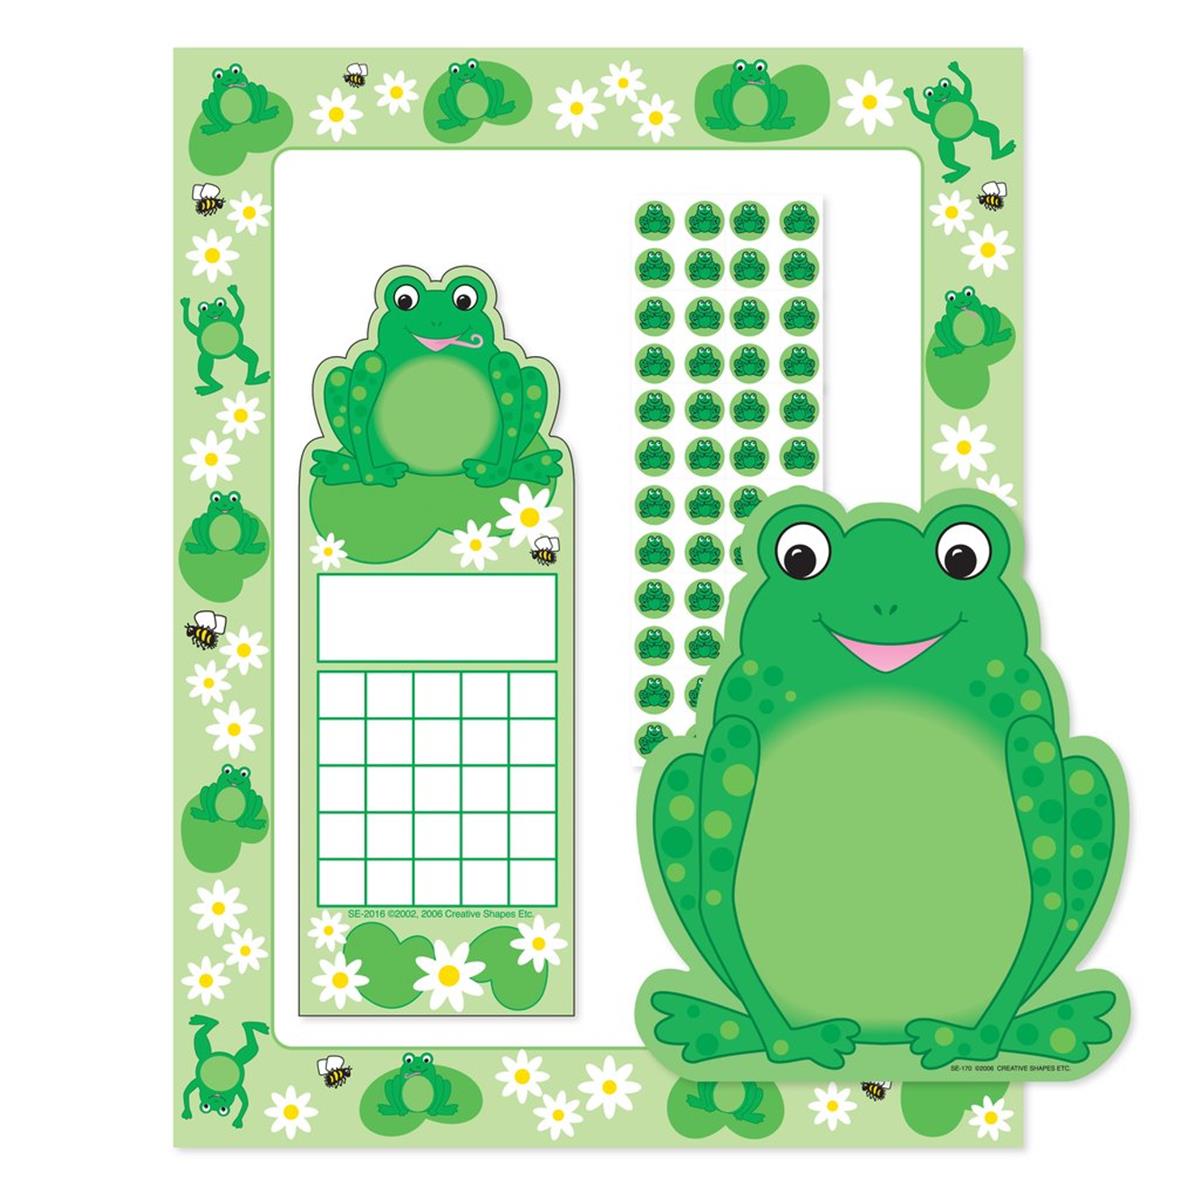 Picture of Creative Shapes Etc SE-7119 11 x 8.5 in. Stationery Set - Frog